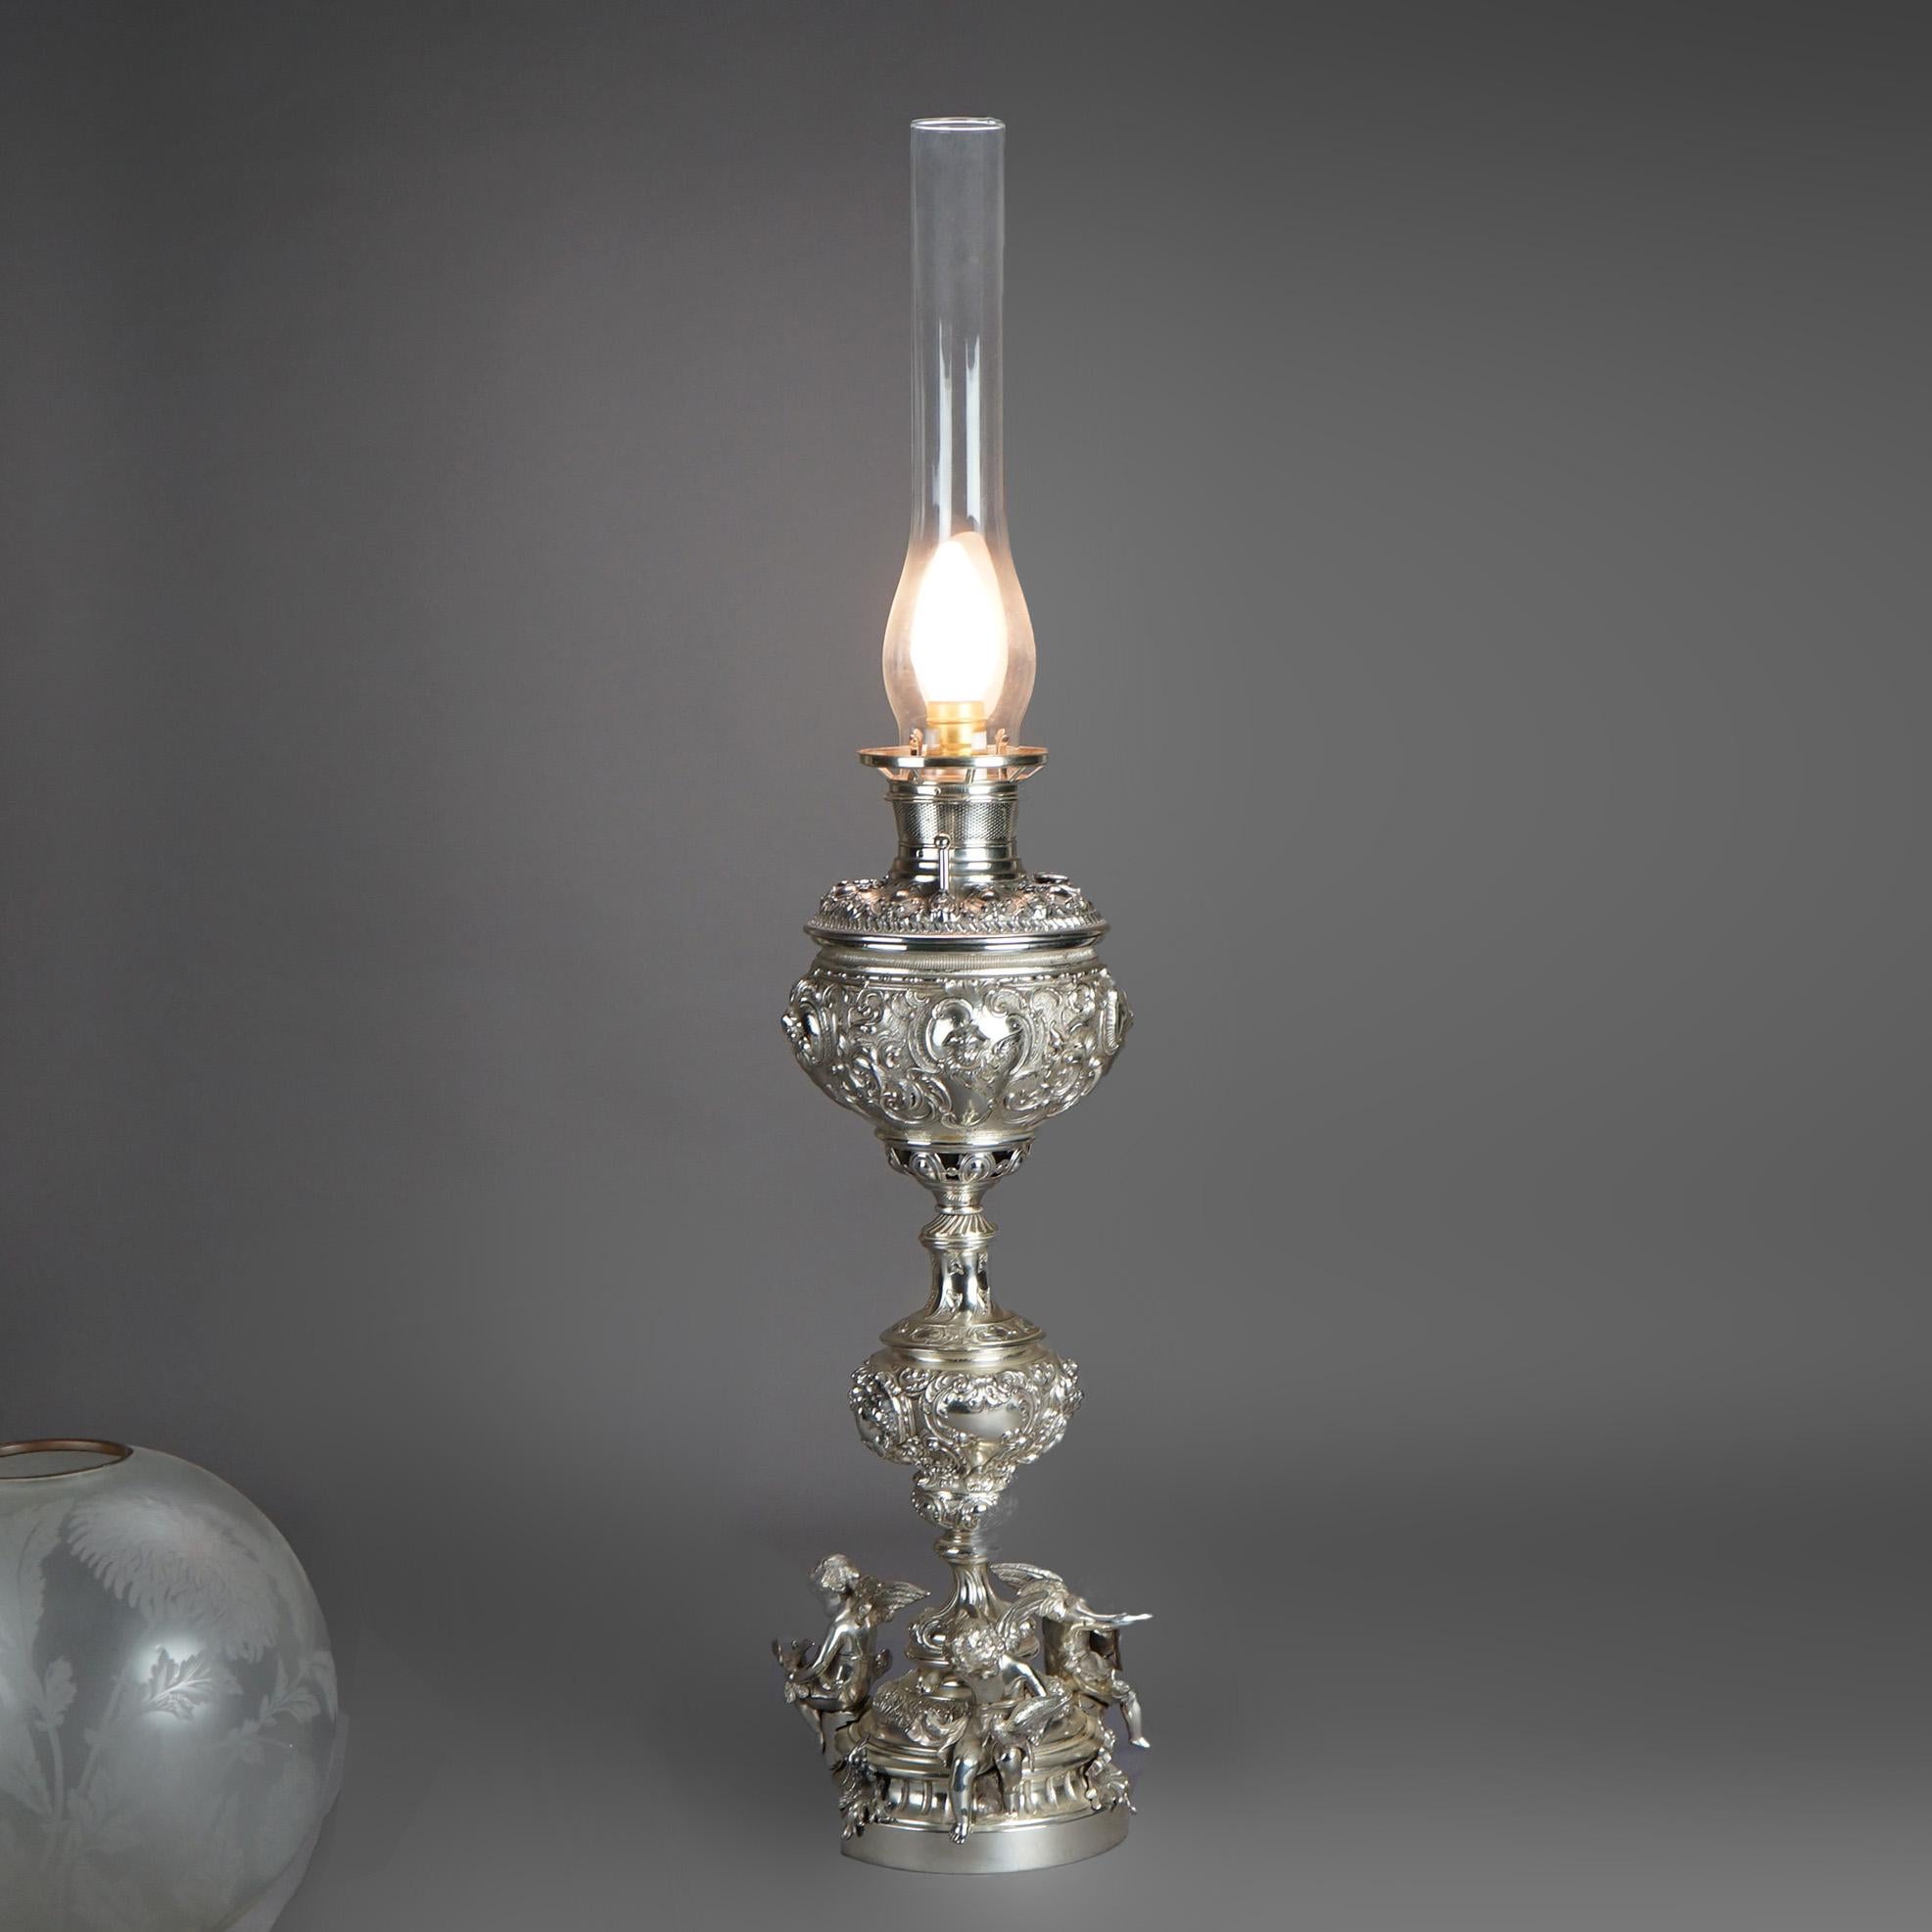 Antique Rococo Figural Silver Plate Parlor Lamp With Winged Cherubs c1890 For Sale 11